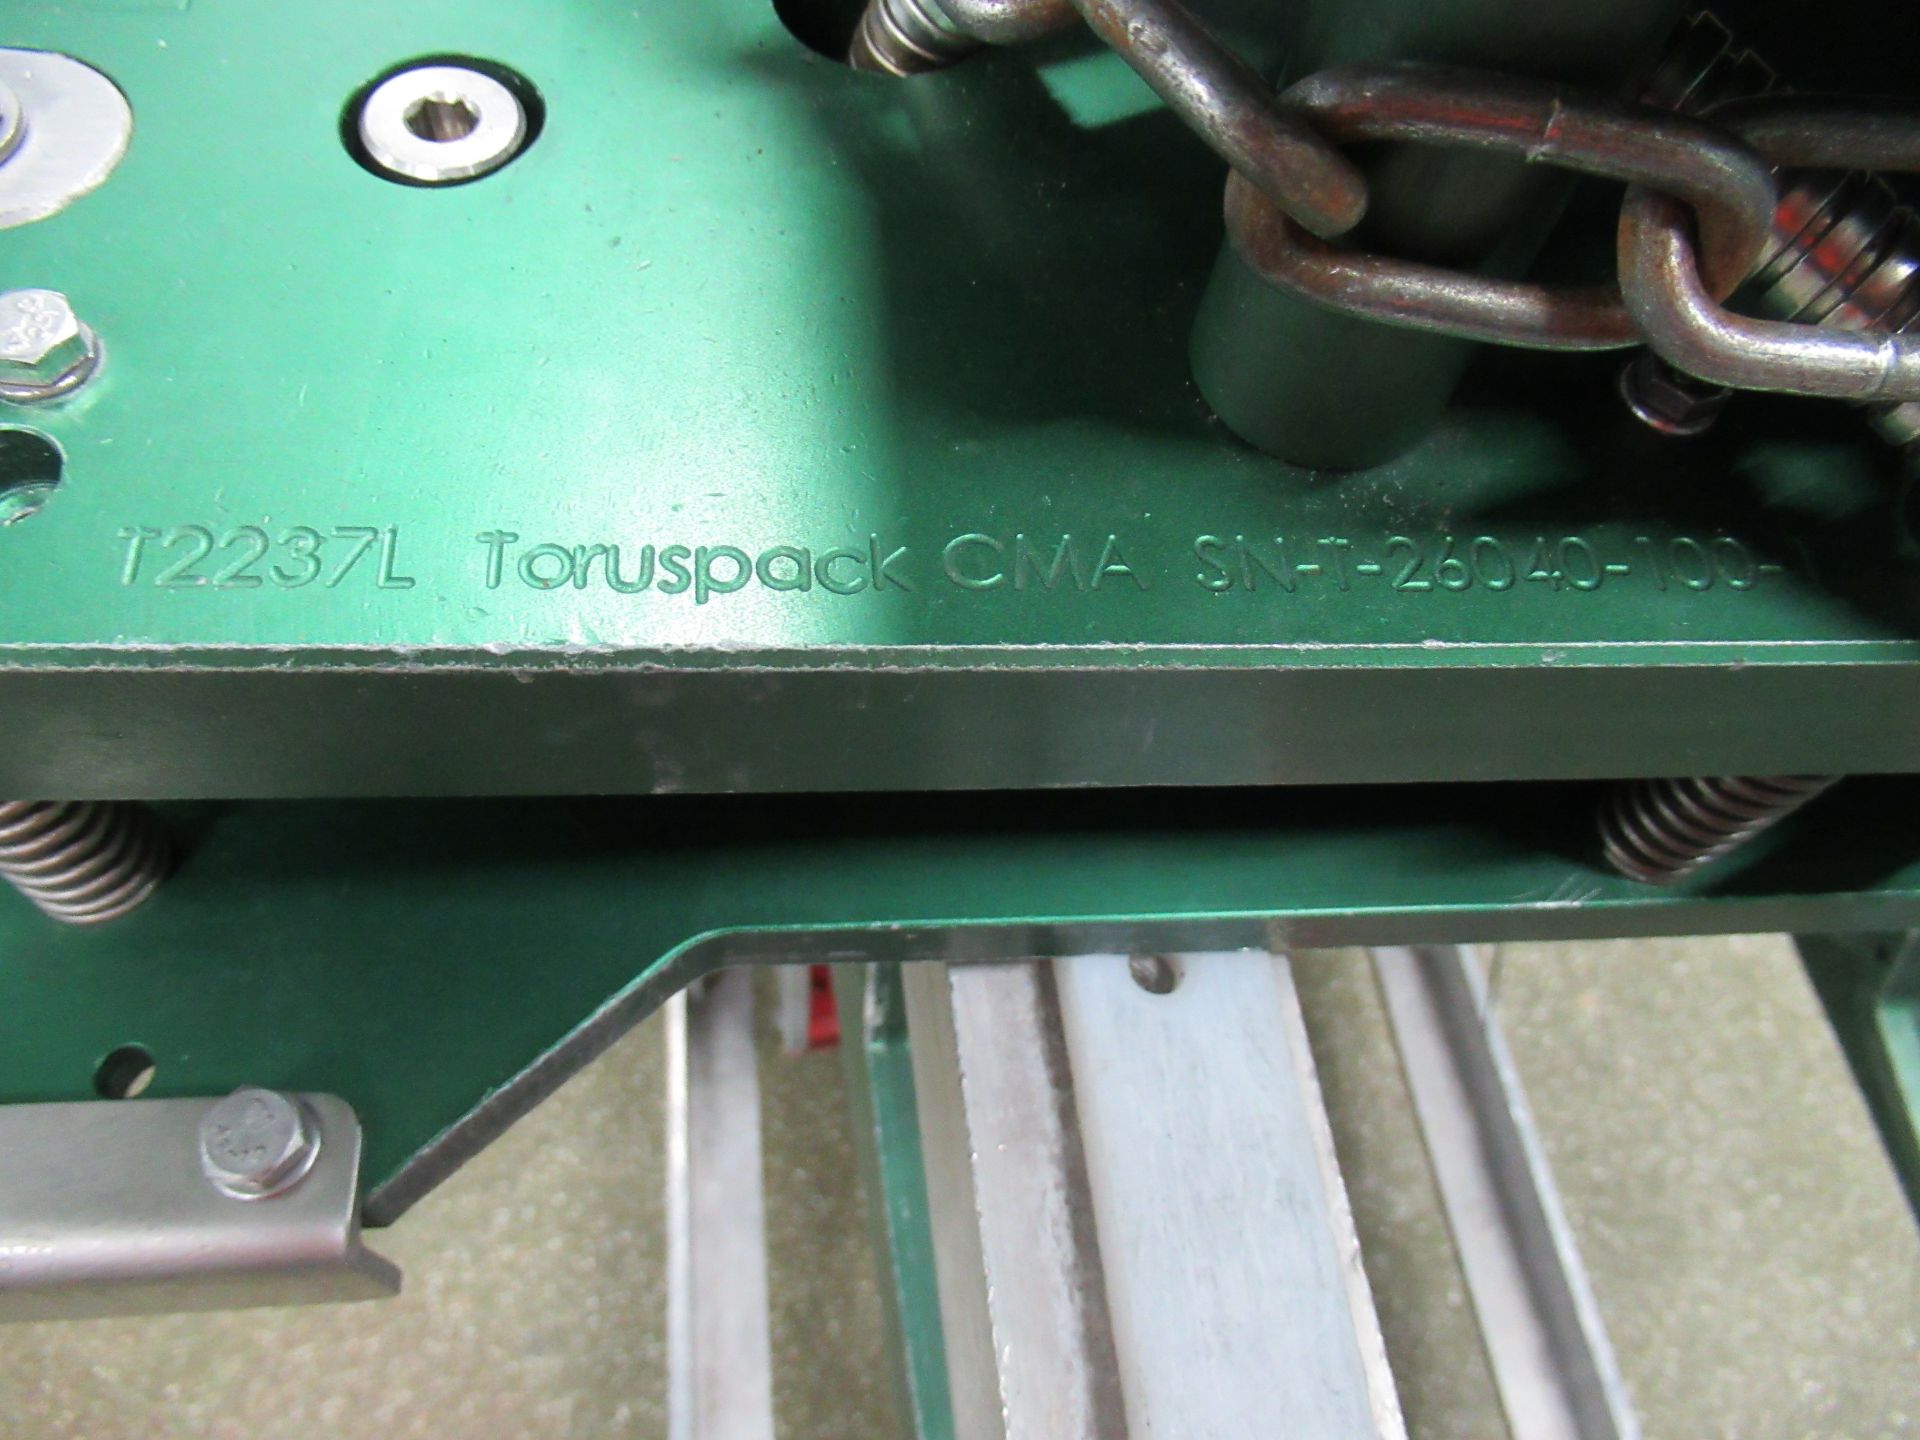 Toruspack CMA T2237L three position plastic tray heat seal tooling set for Proseal tray sealer - Image 3 of 8